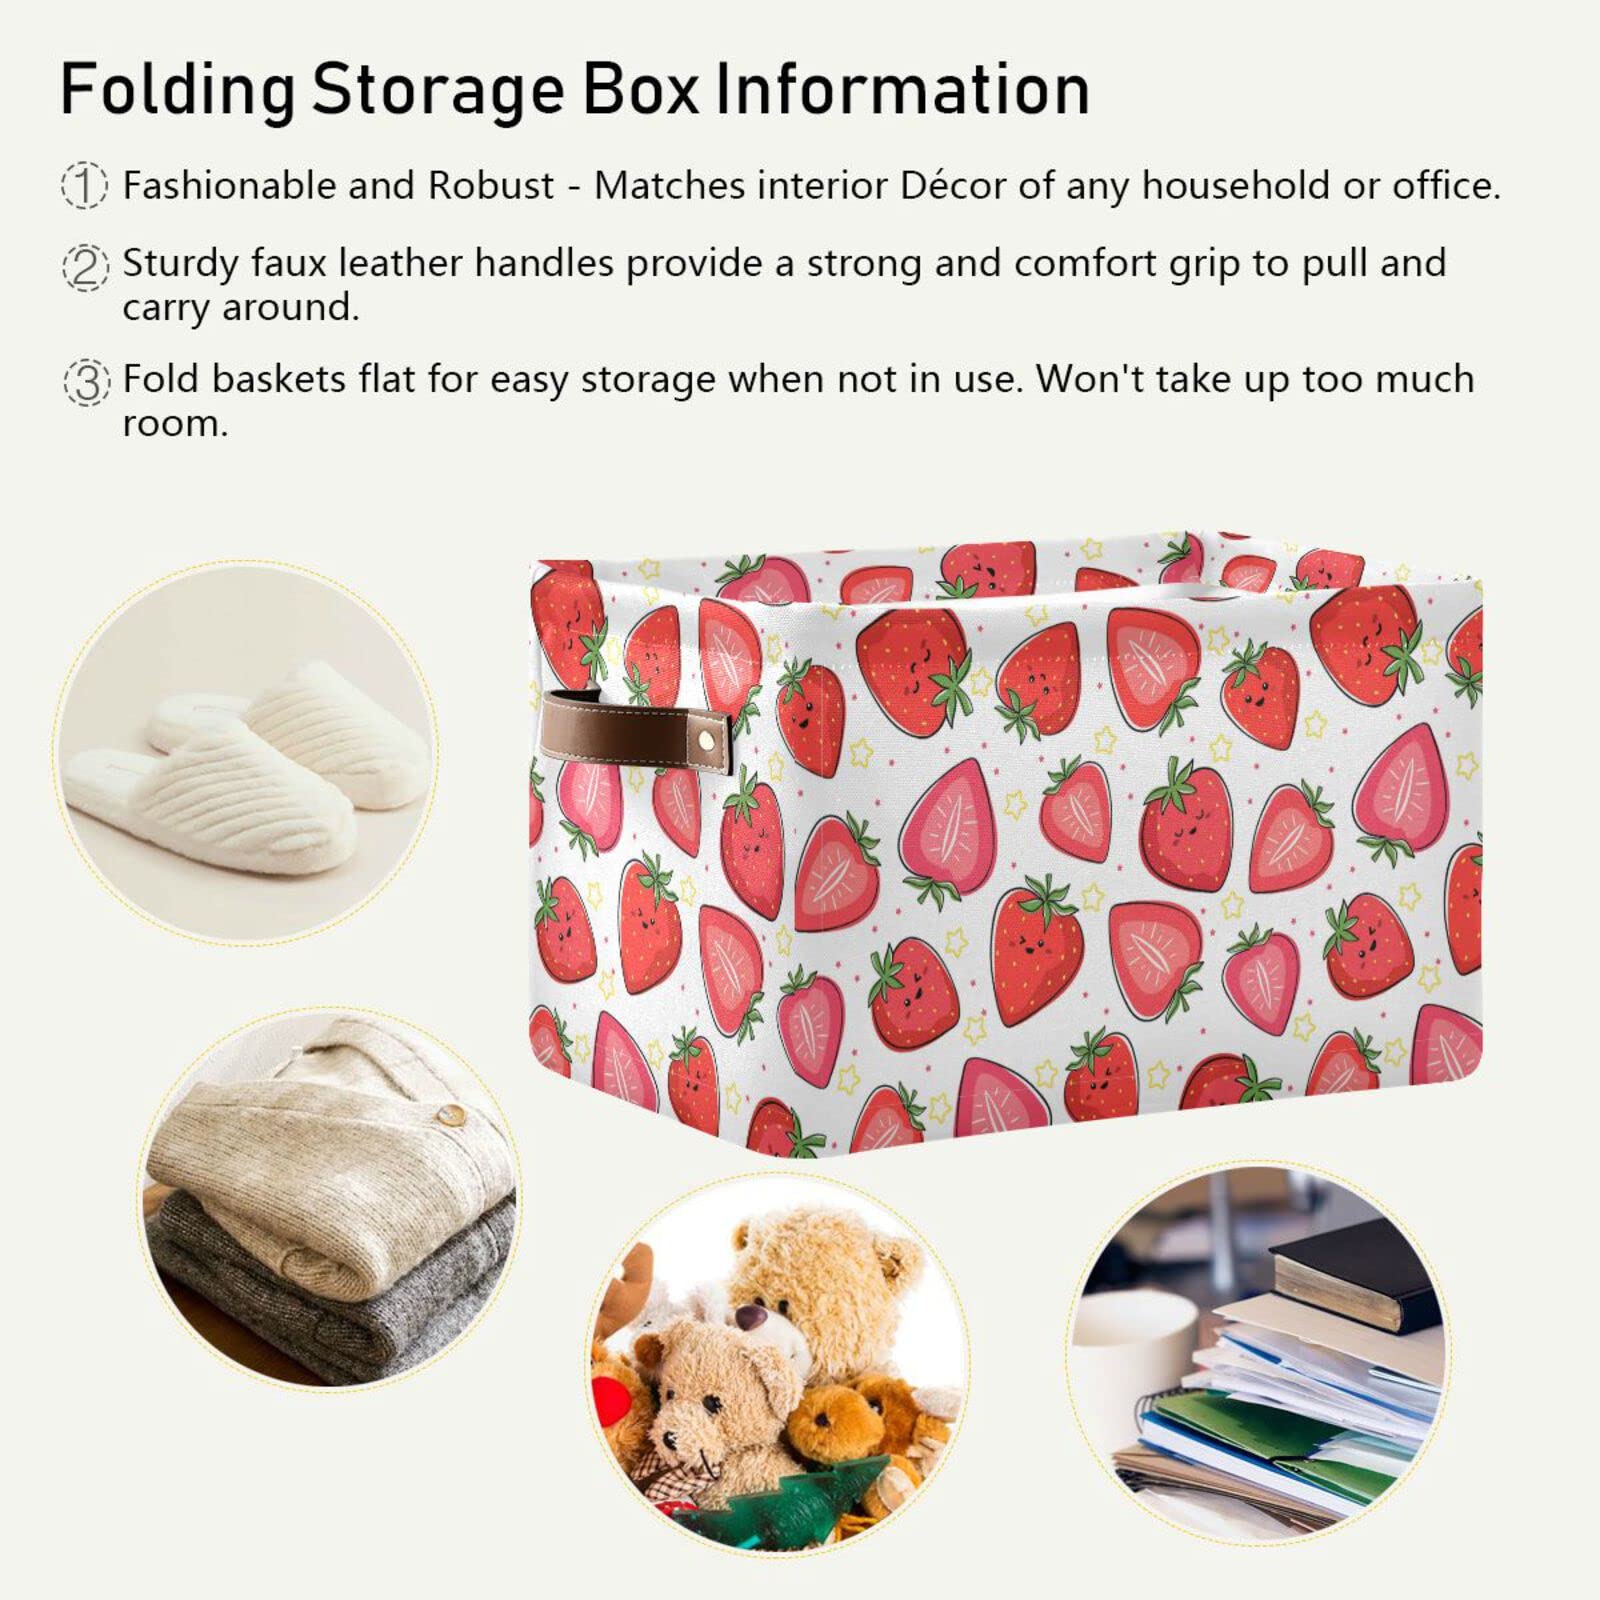 ALAZA Strawberry Star Polka Dots Large Storage Basket with Handles Foldable Decorative 1 Pack Storage Bin Box for Organizing Living Room Shelves Office Closet Clothes